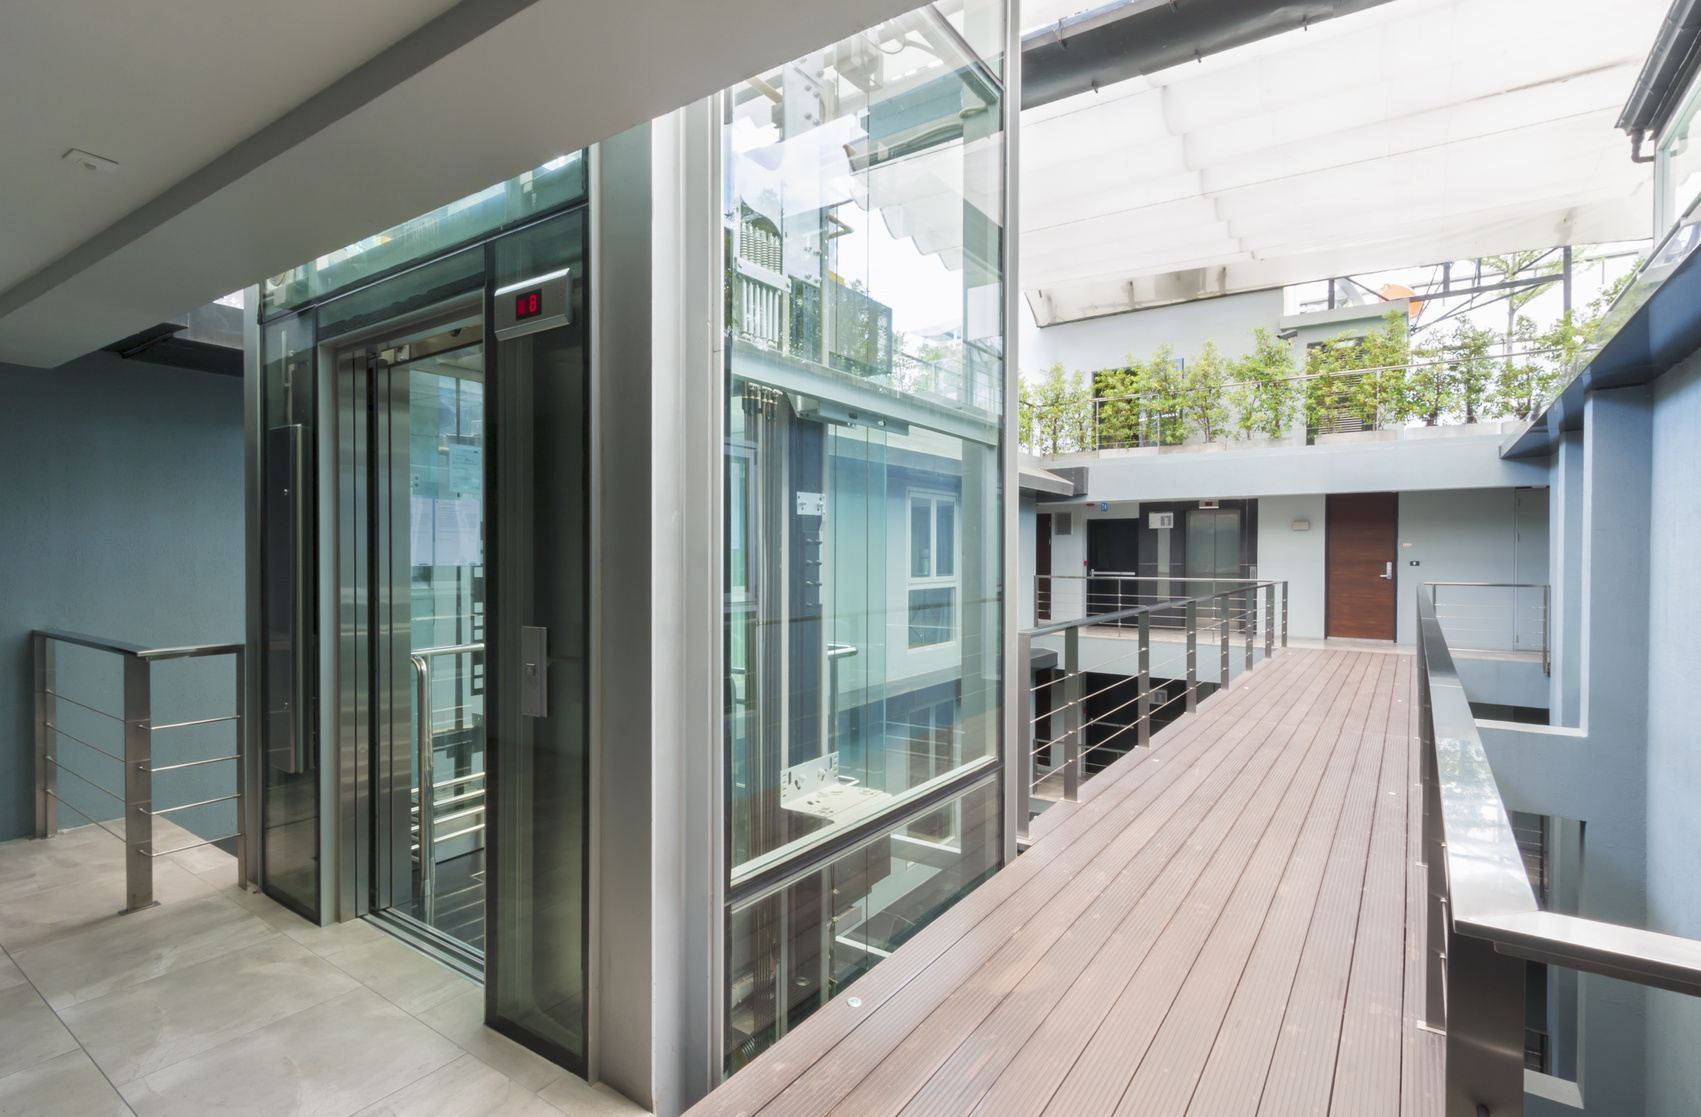 apartment interior with walkway bridge and glass lift opened.